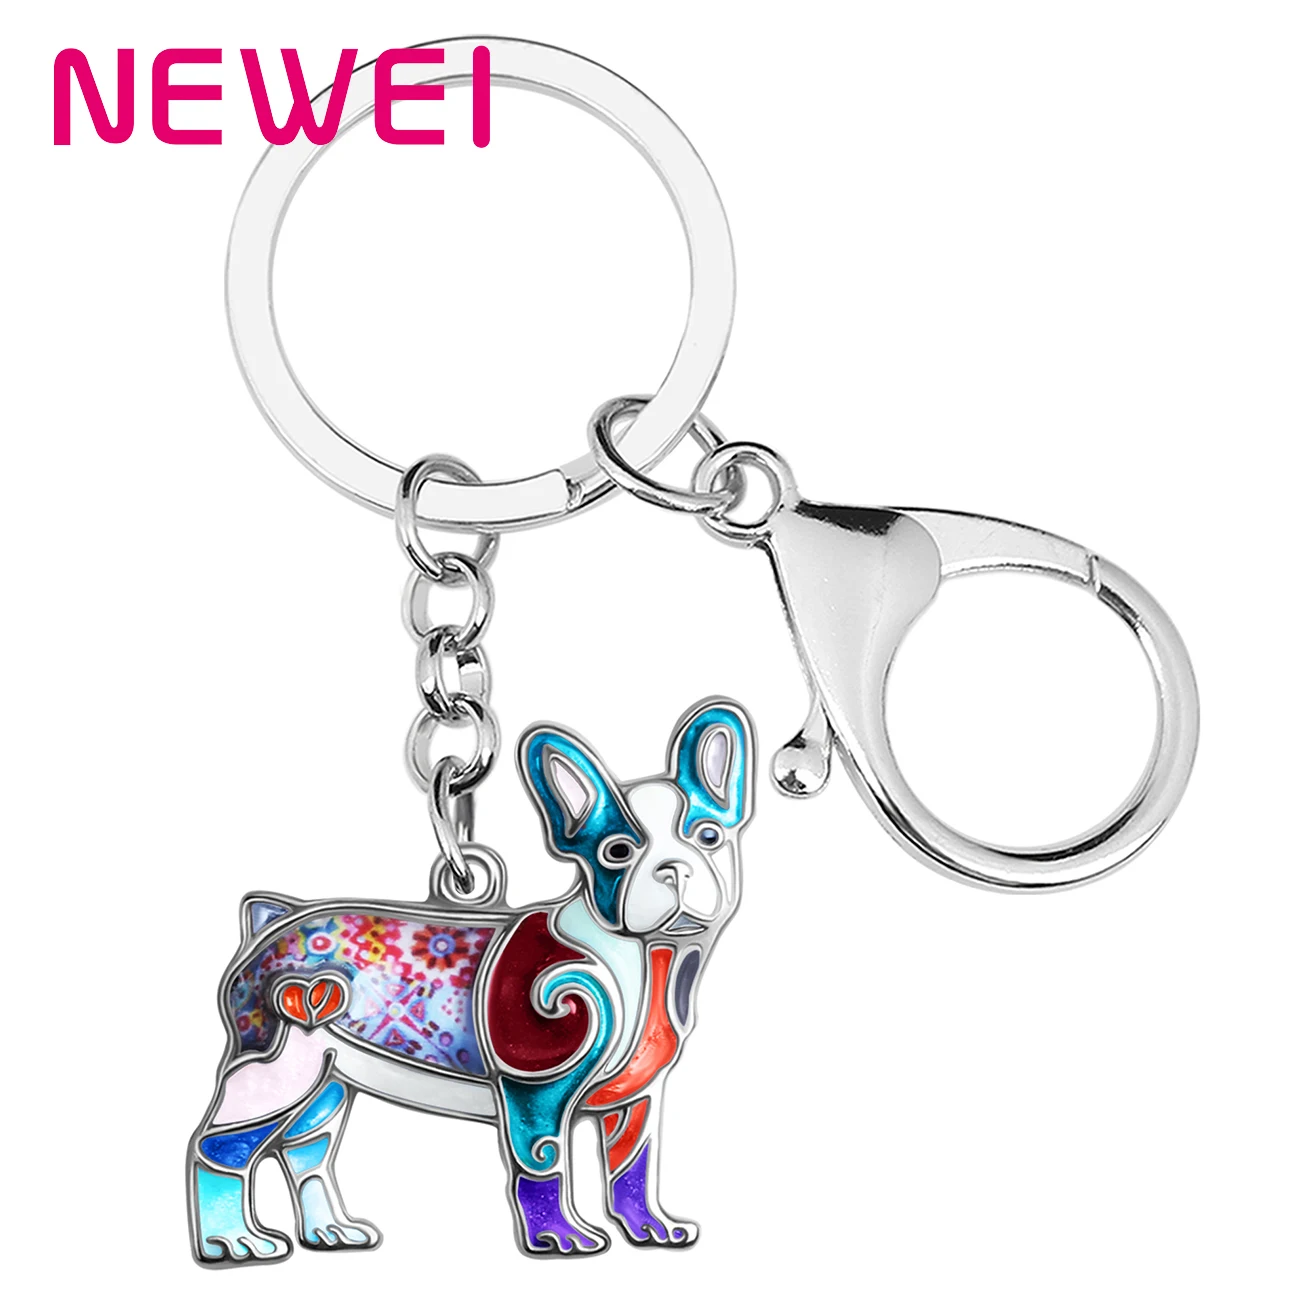 

Enamel Alloy Metal French Bulldog Keychains Dogs Key Chain Ring Fashion Animals Pets Jewelry For Women Men Teens Charms Gifts, Blue brown black multicolor red purple